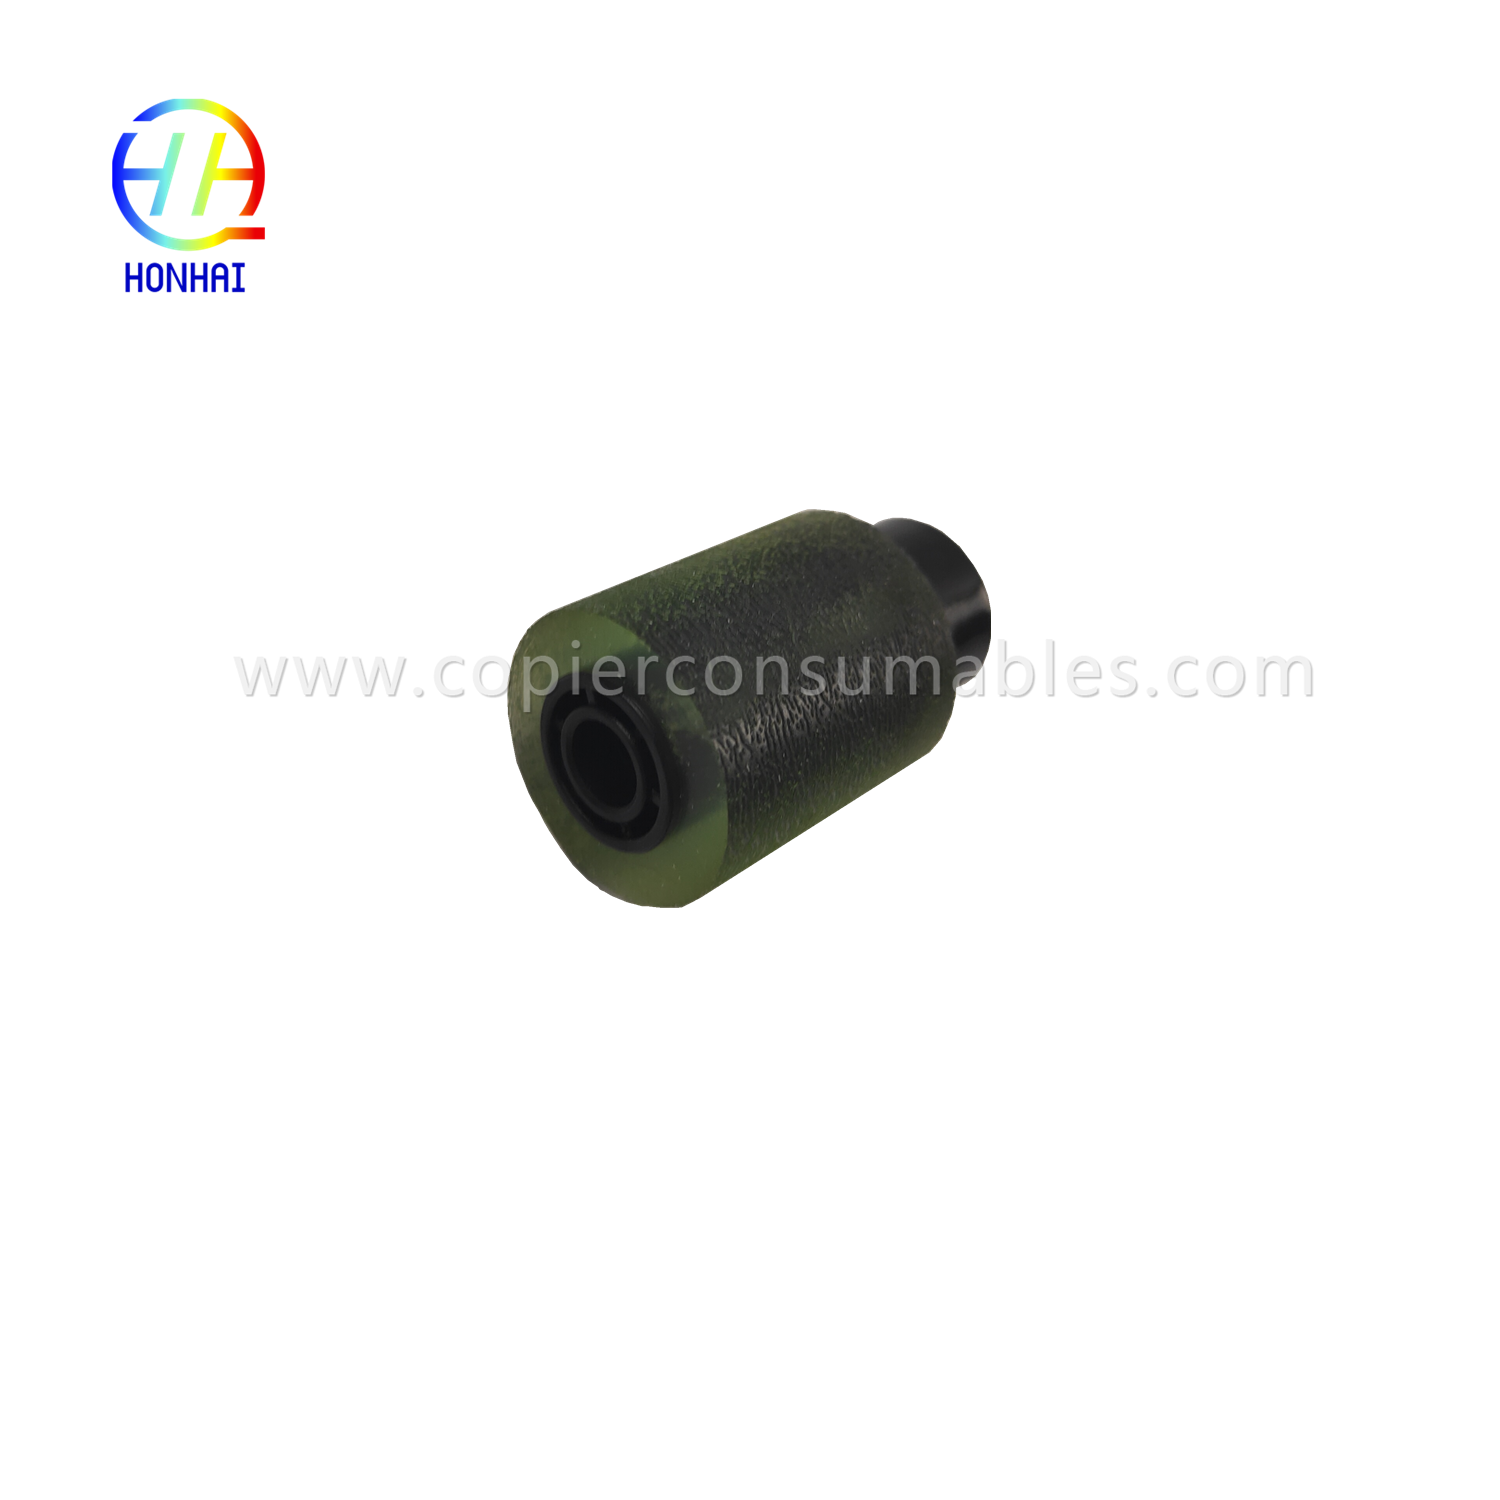 https://c585.goodao.net/feed-roller-for-ricoh-mpc2003-mpc2503-mpc3003-mpc3503-af031094- تېز يەتكۈزۈش